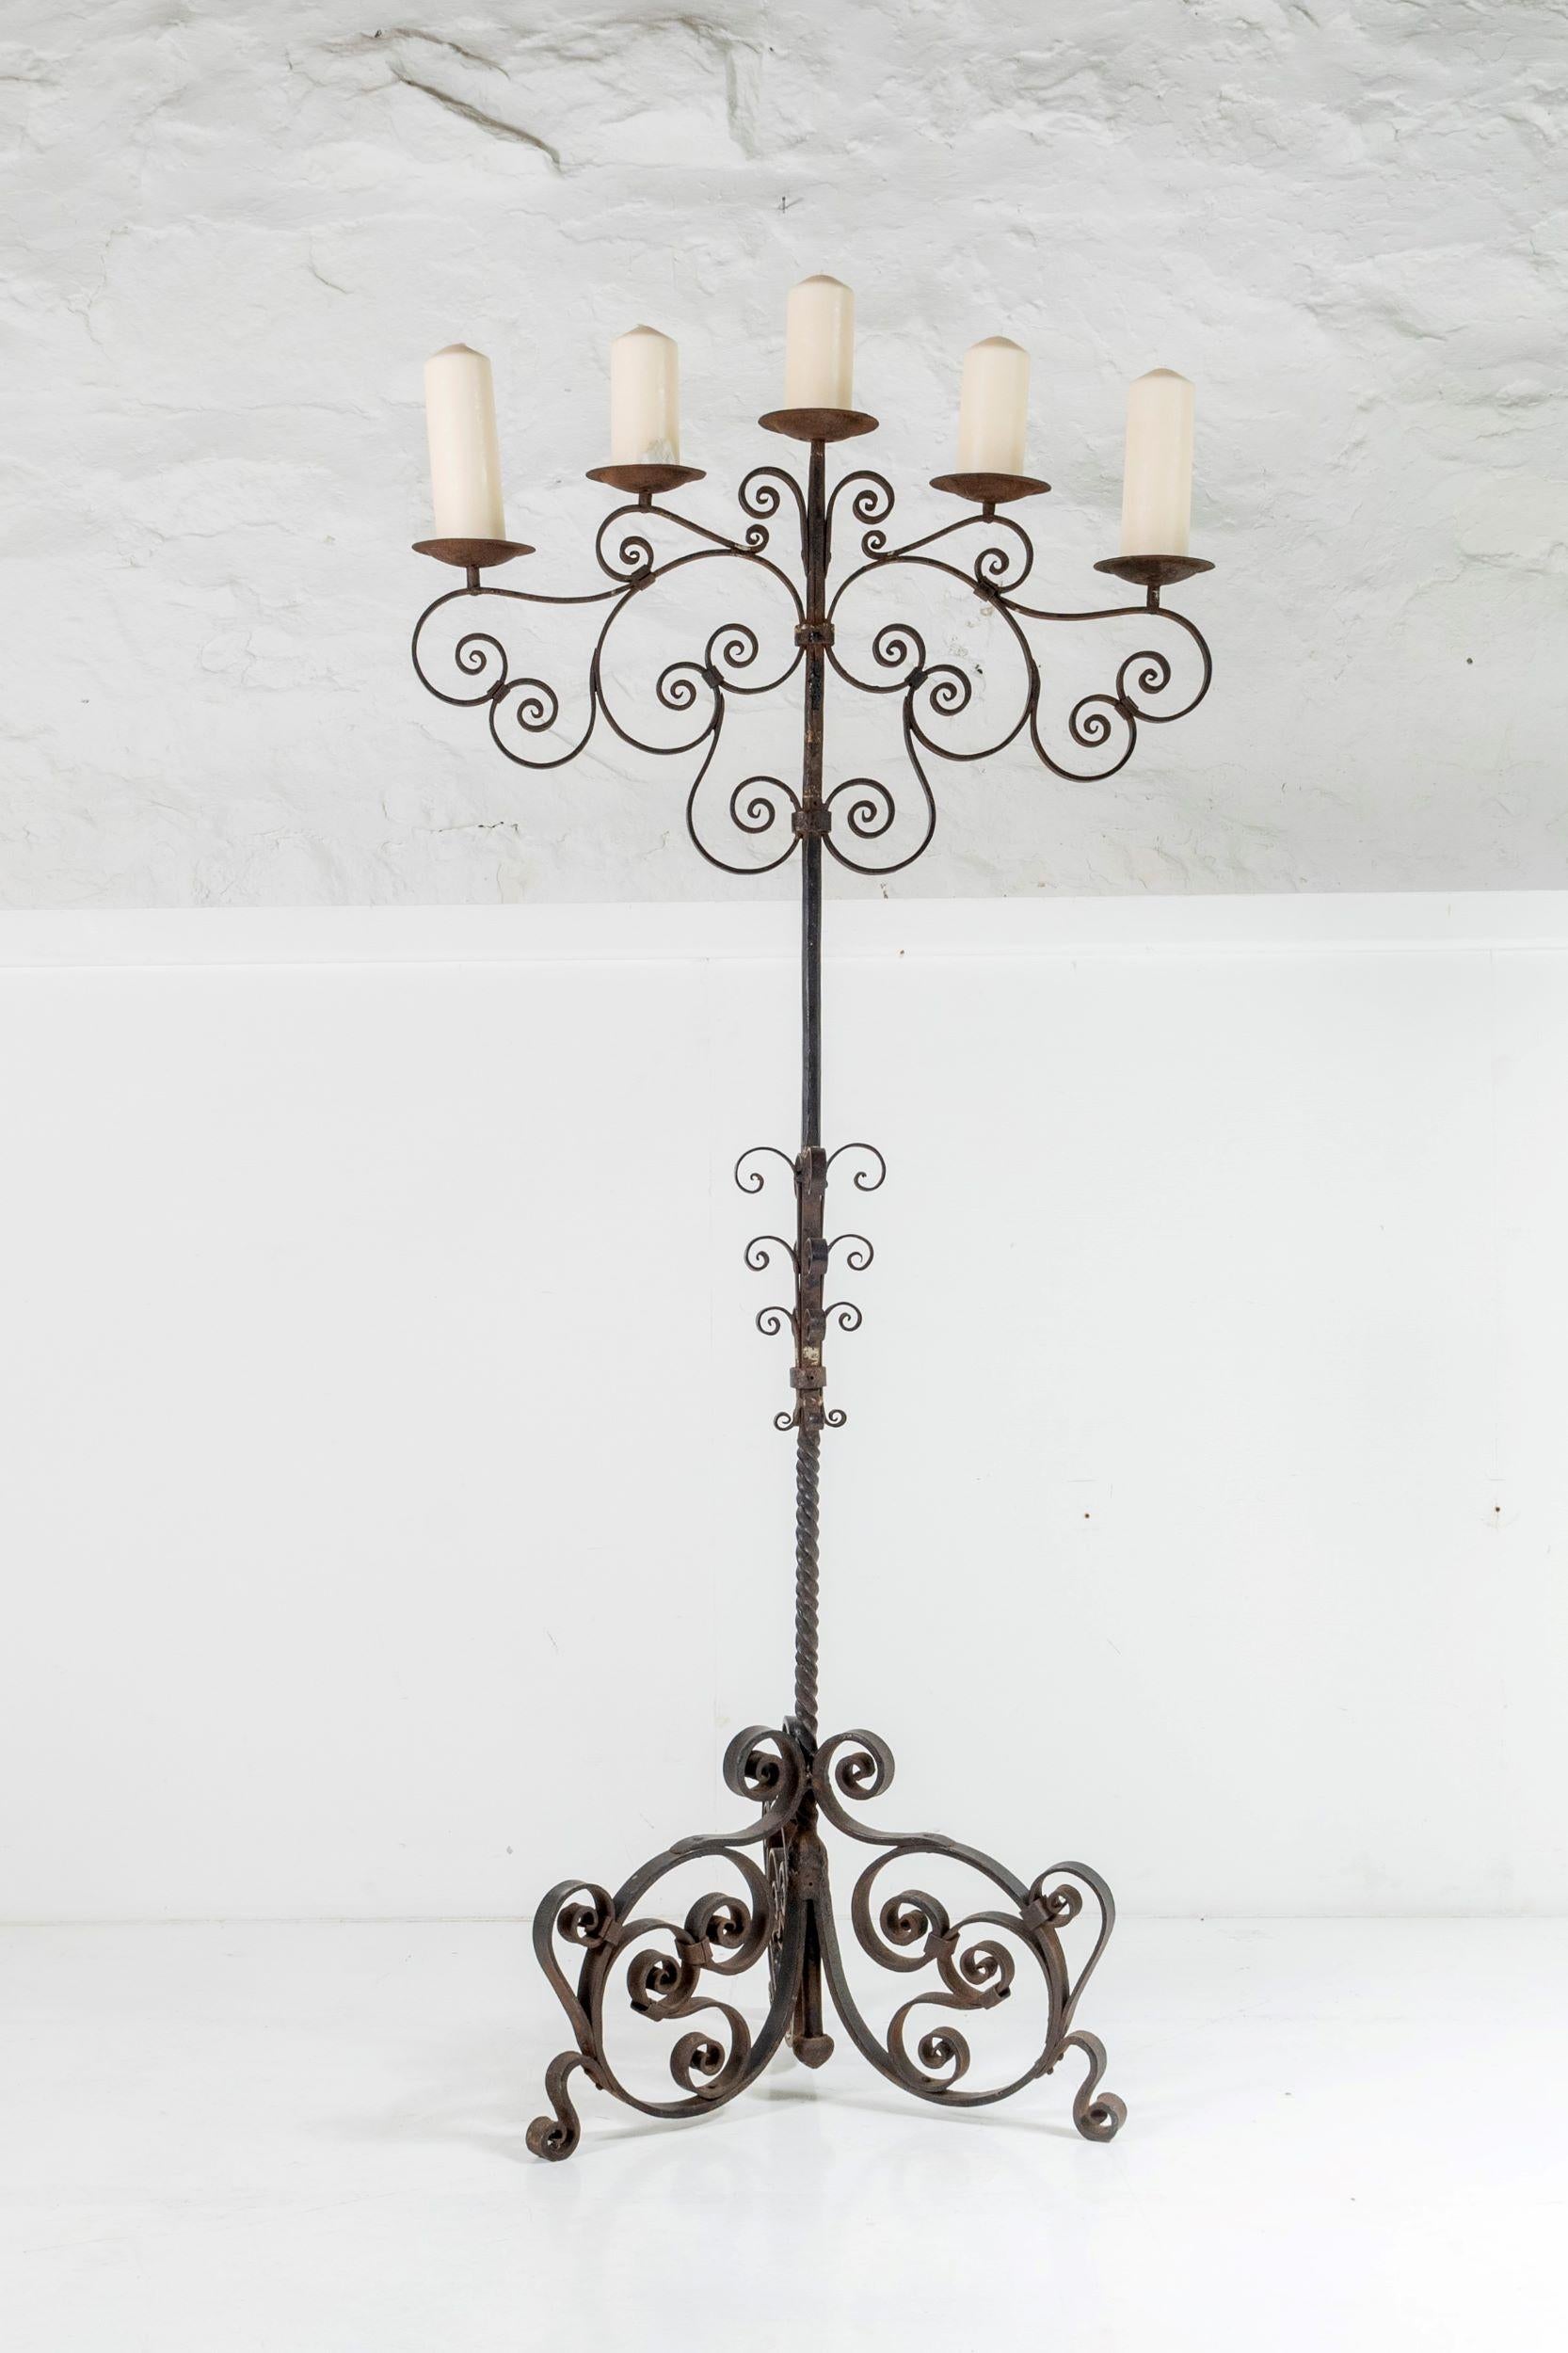 Late 19th Century English Castle Candelabra Large Scale Heavy Wrought Iron Pricket Candle Tree For Sale